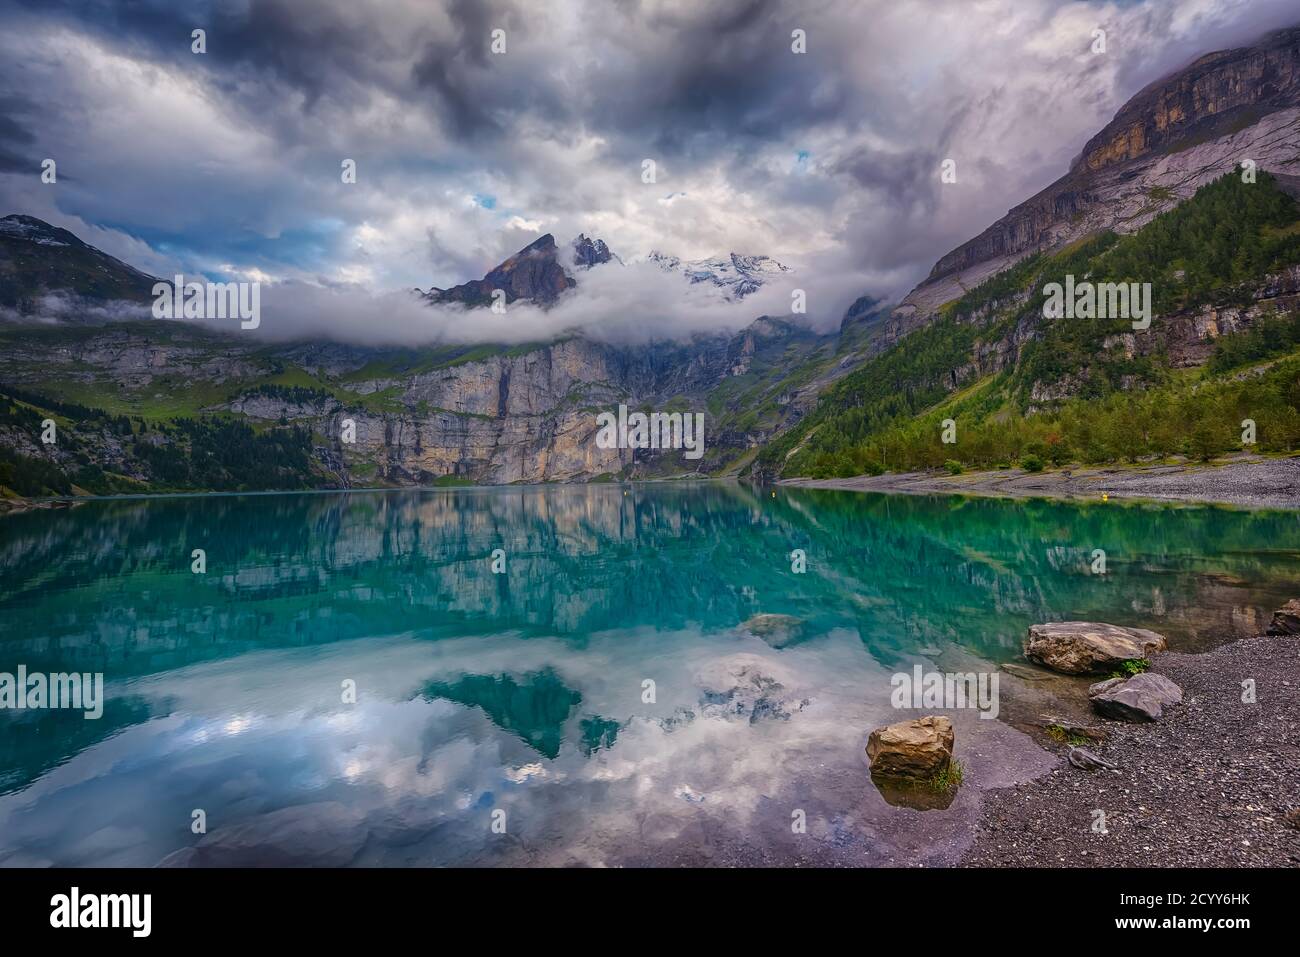 Oschinensee, Kandersteg Switzerland - UNESCO Heritage Sites is a beautiful place for all ages, hiking trail to the lake t is family-friendly. Stock Photo